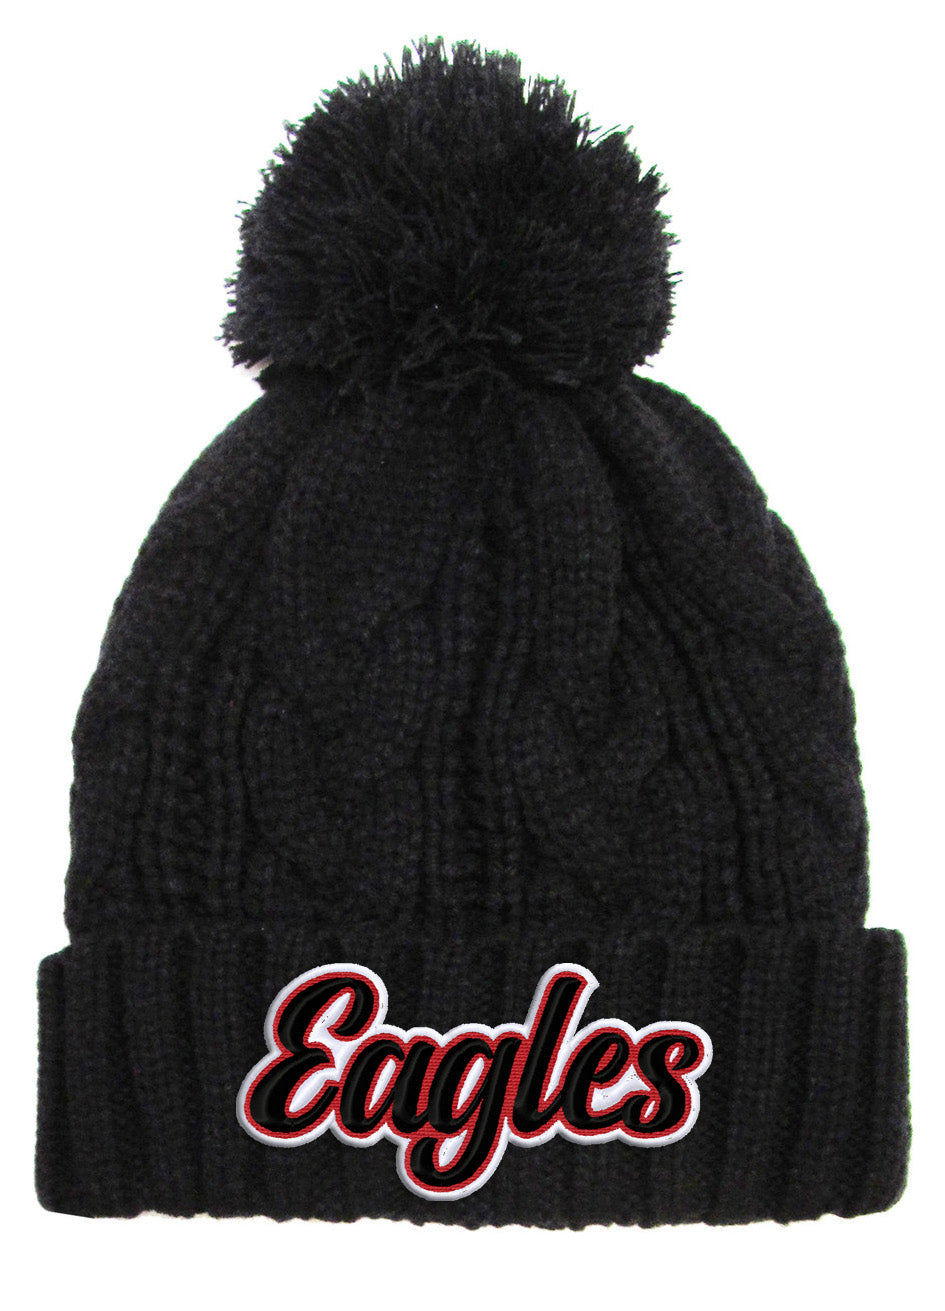 MMS PTO-Eagles or Power Eagle Embroidered Cabled Pom Beanie, 2 Design Options